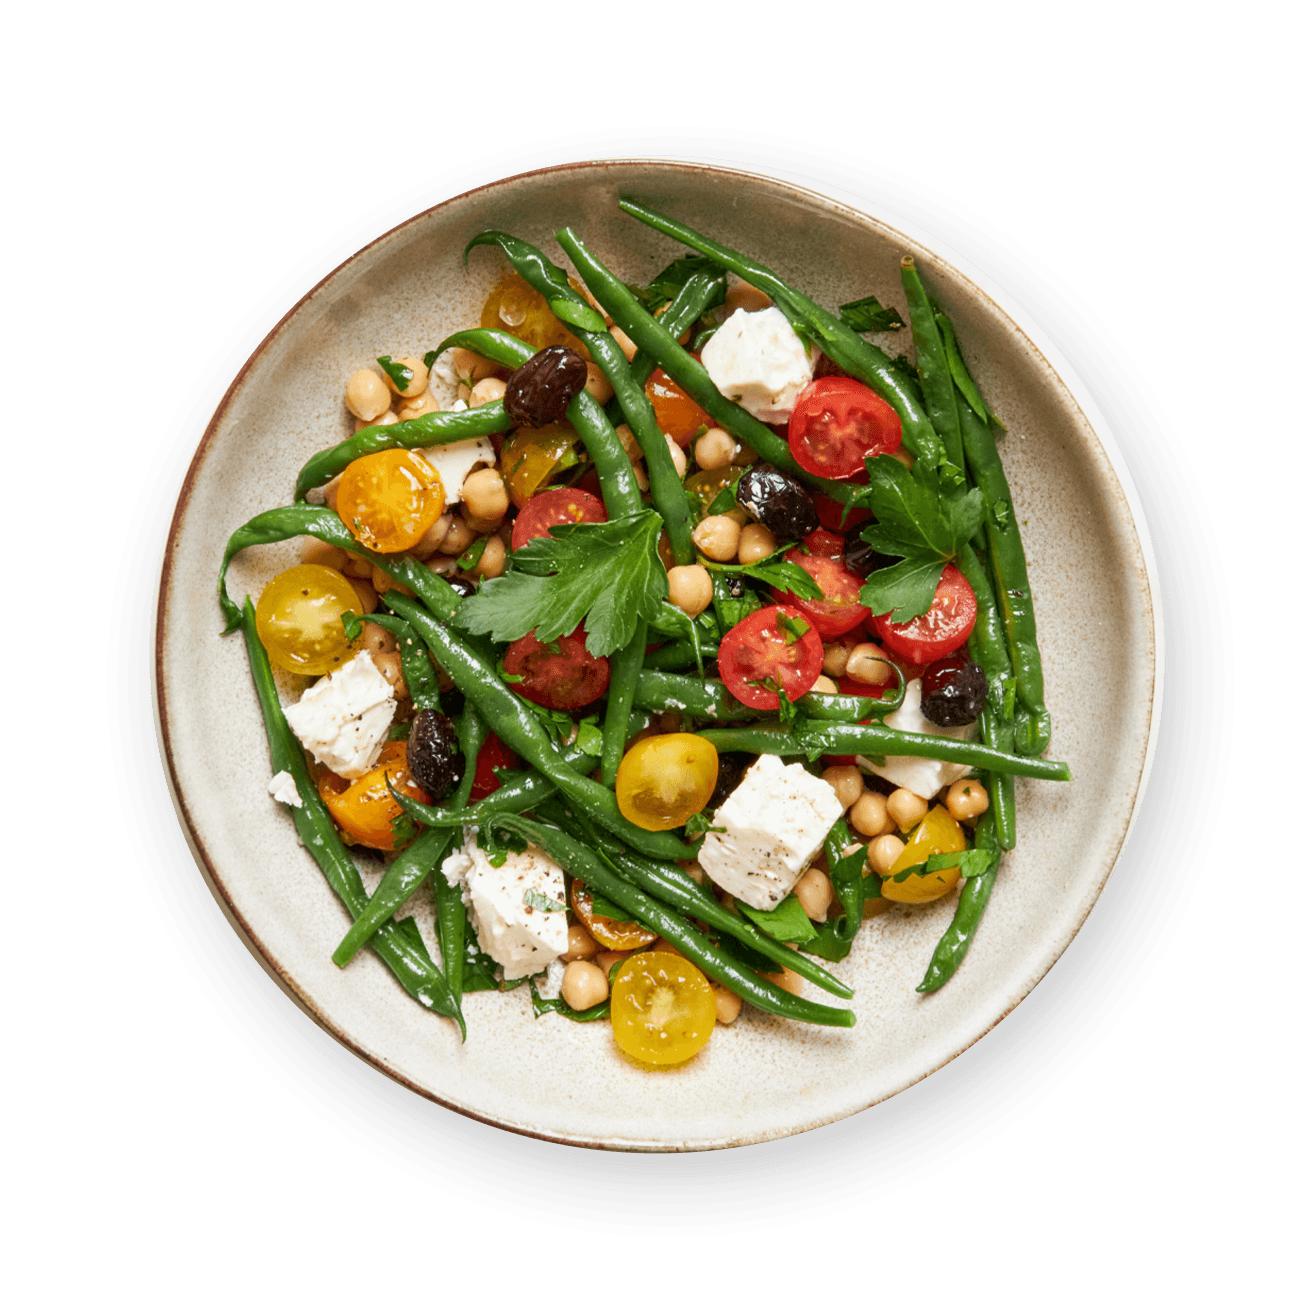 salade-pois-chiches-haricots-verts-tomates-et-feta